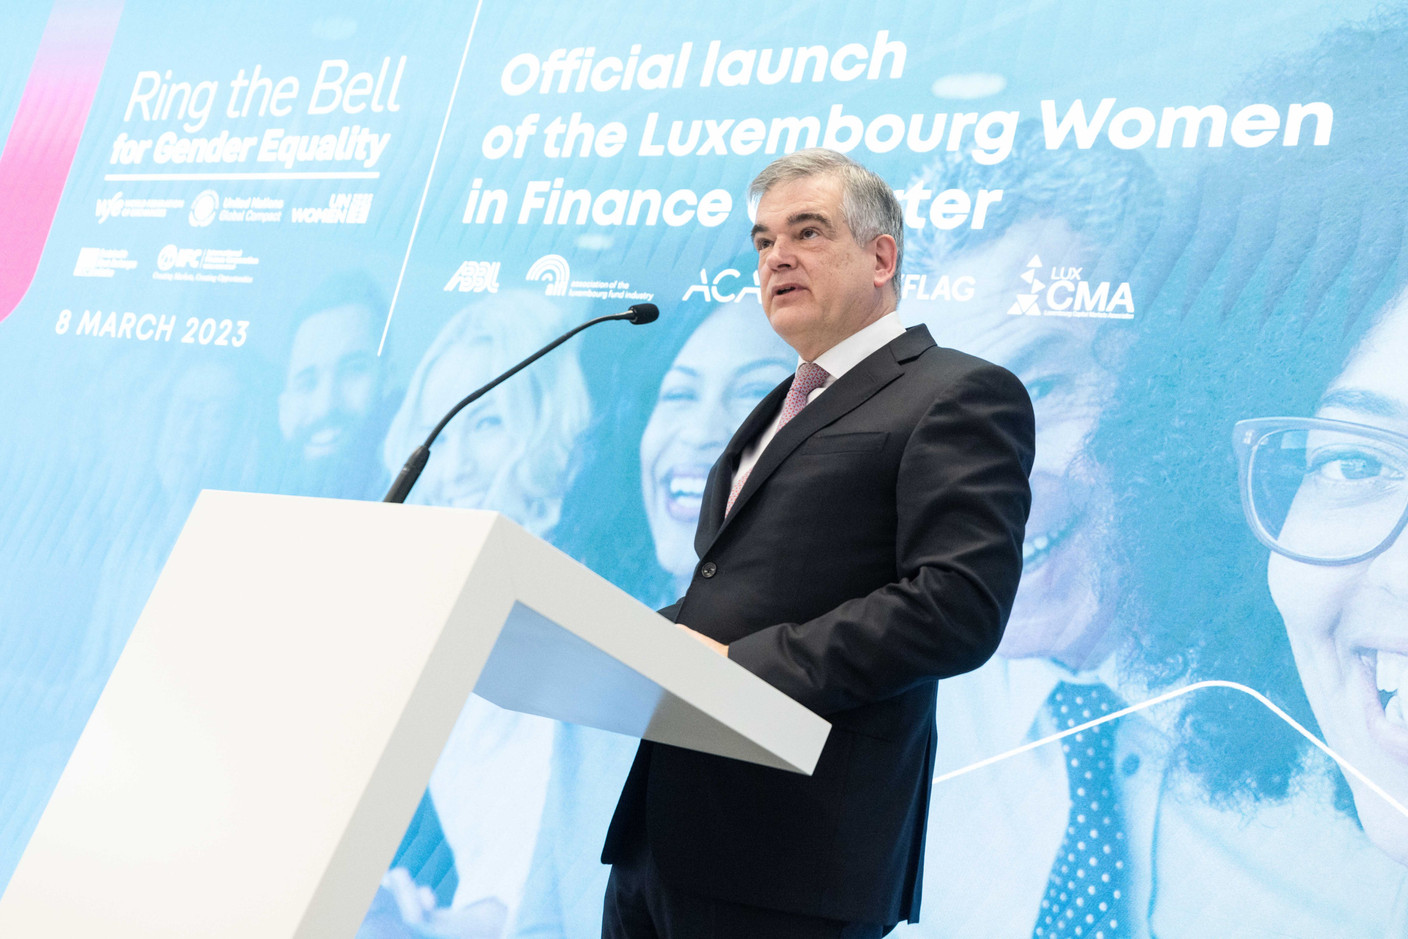 Launch of Luxembourg’s Women in Finance Charter, Bourse de Luxembourg. Photo: Guy Wolff/Maison Moderne